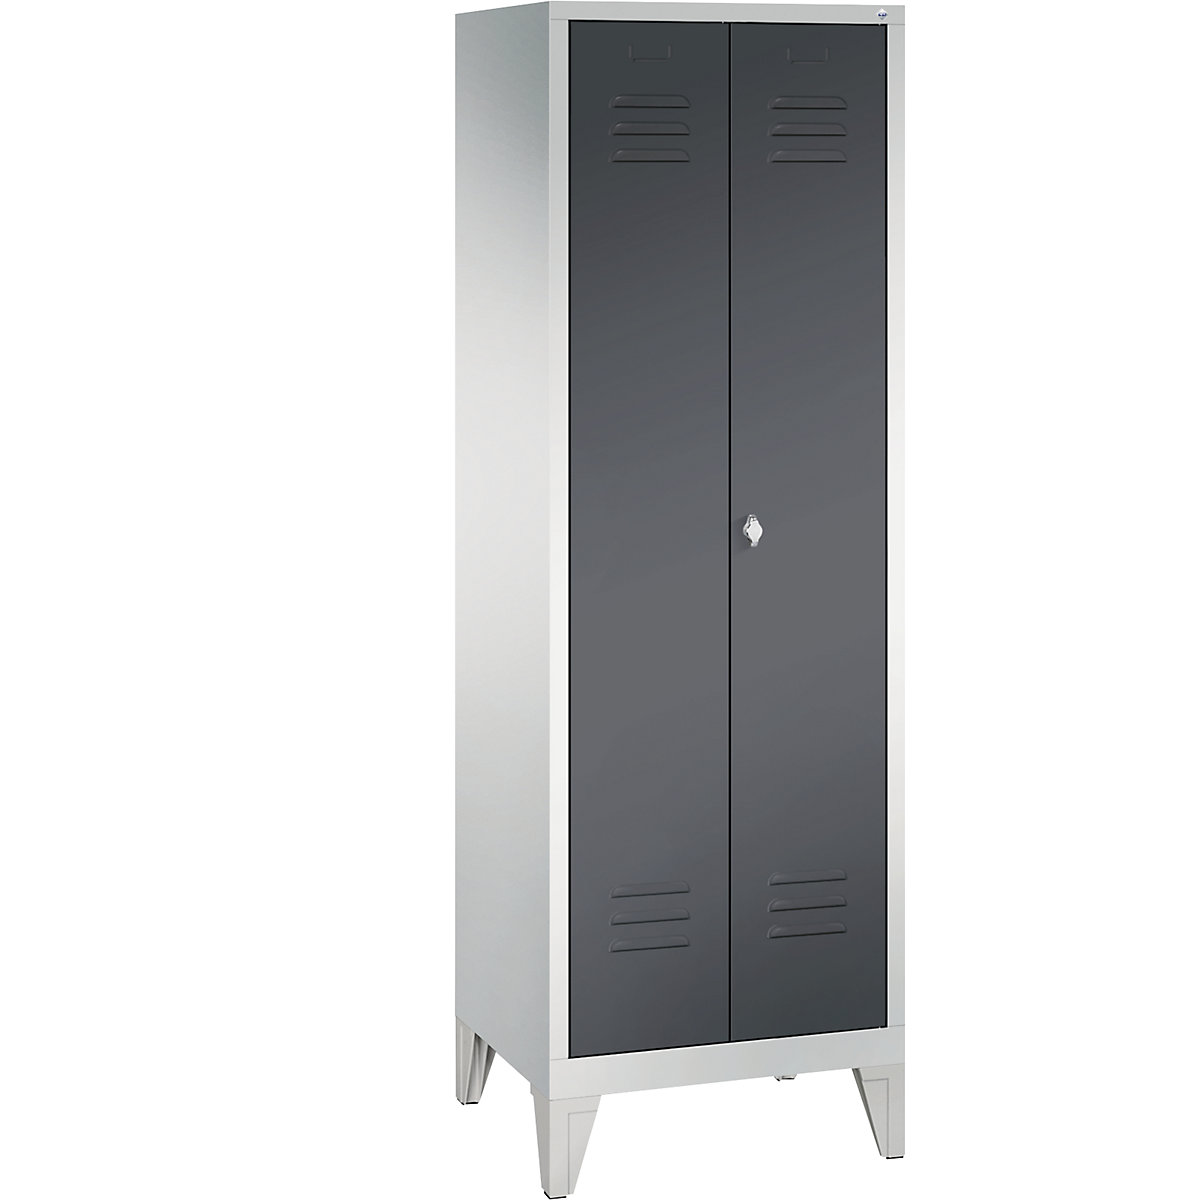 CLASSIC equipment cupboard with feet – C+P, 2 compartments, compartment width 300 mm, light grey / black grey-14